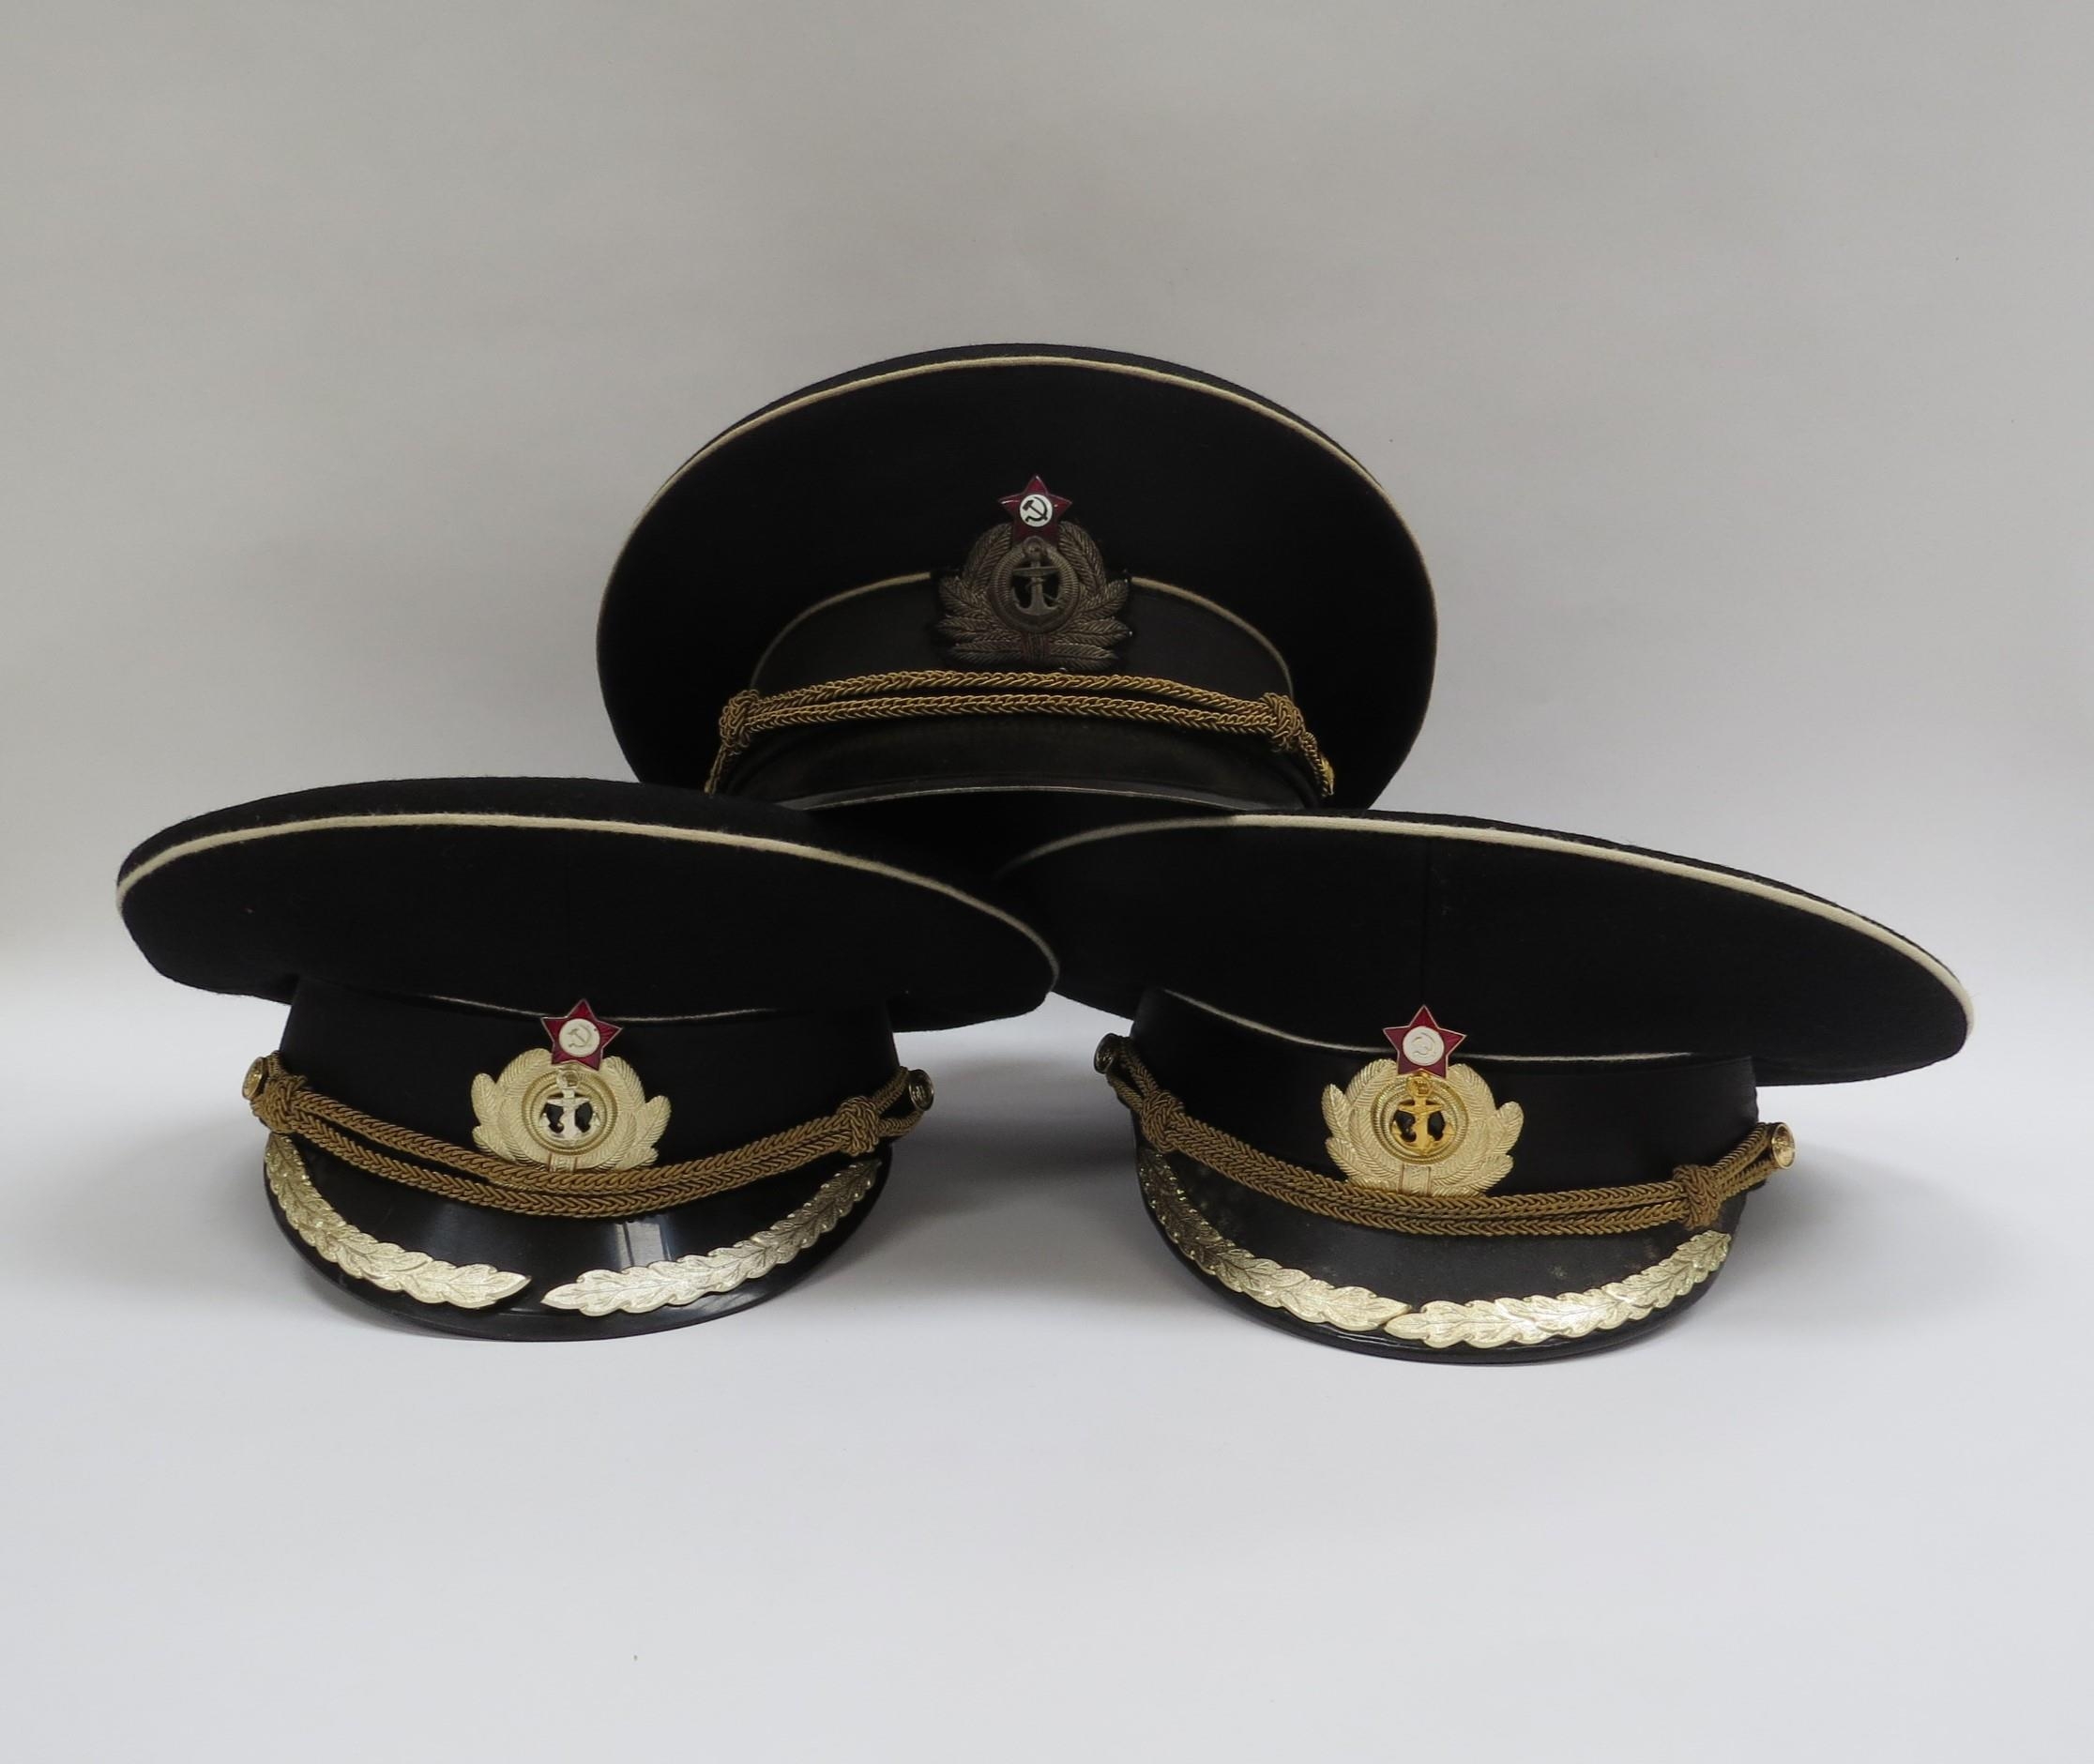 Three USSR Russian Soviet Naval officer's peaked visor caps, two high ranking with leaves to